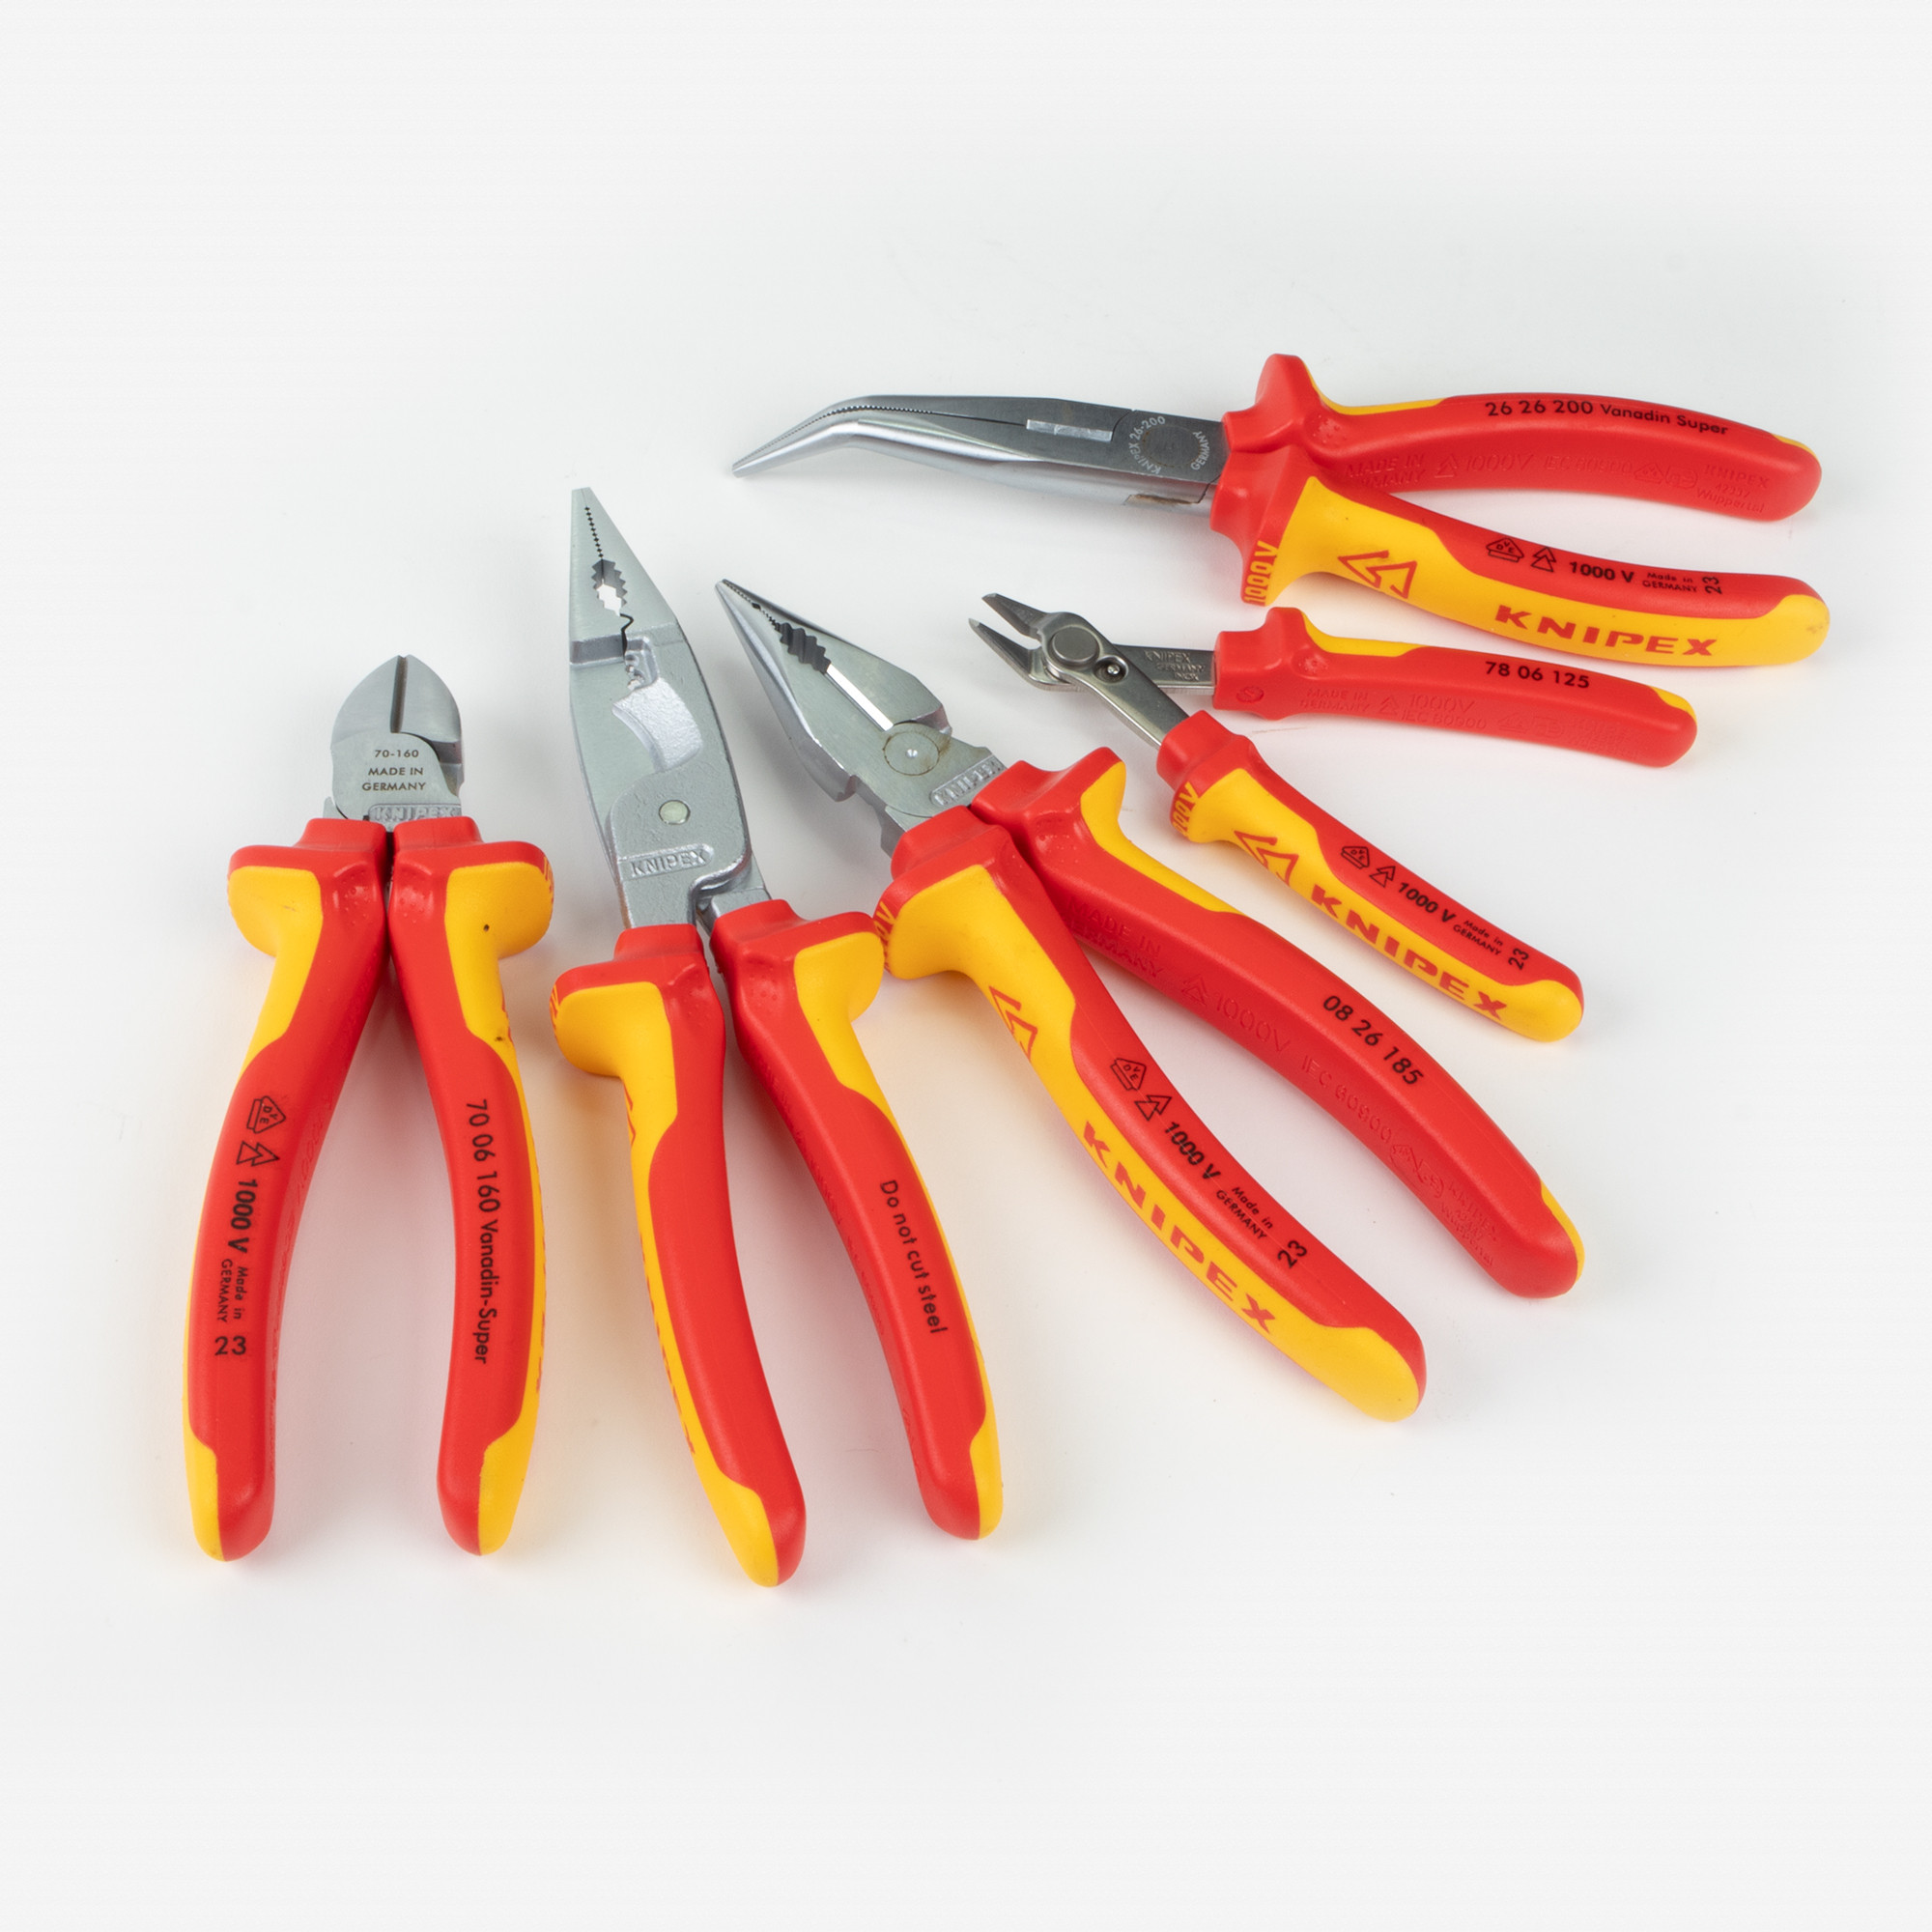 KNIPEX® Tool Box Set Clearance Sale Limited To Three Days – Knipex Shop  Online Store